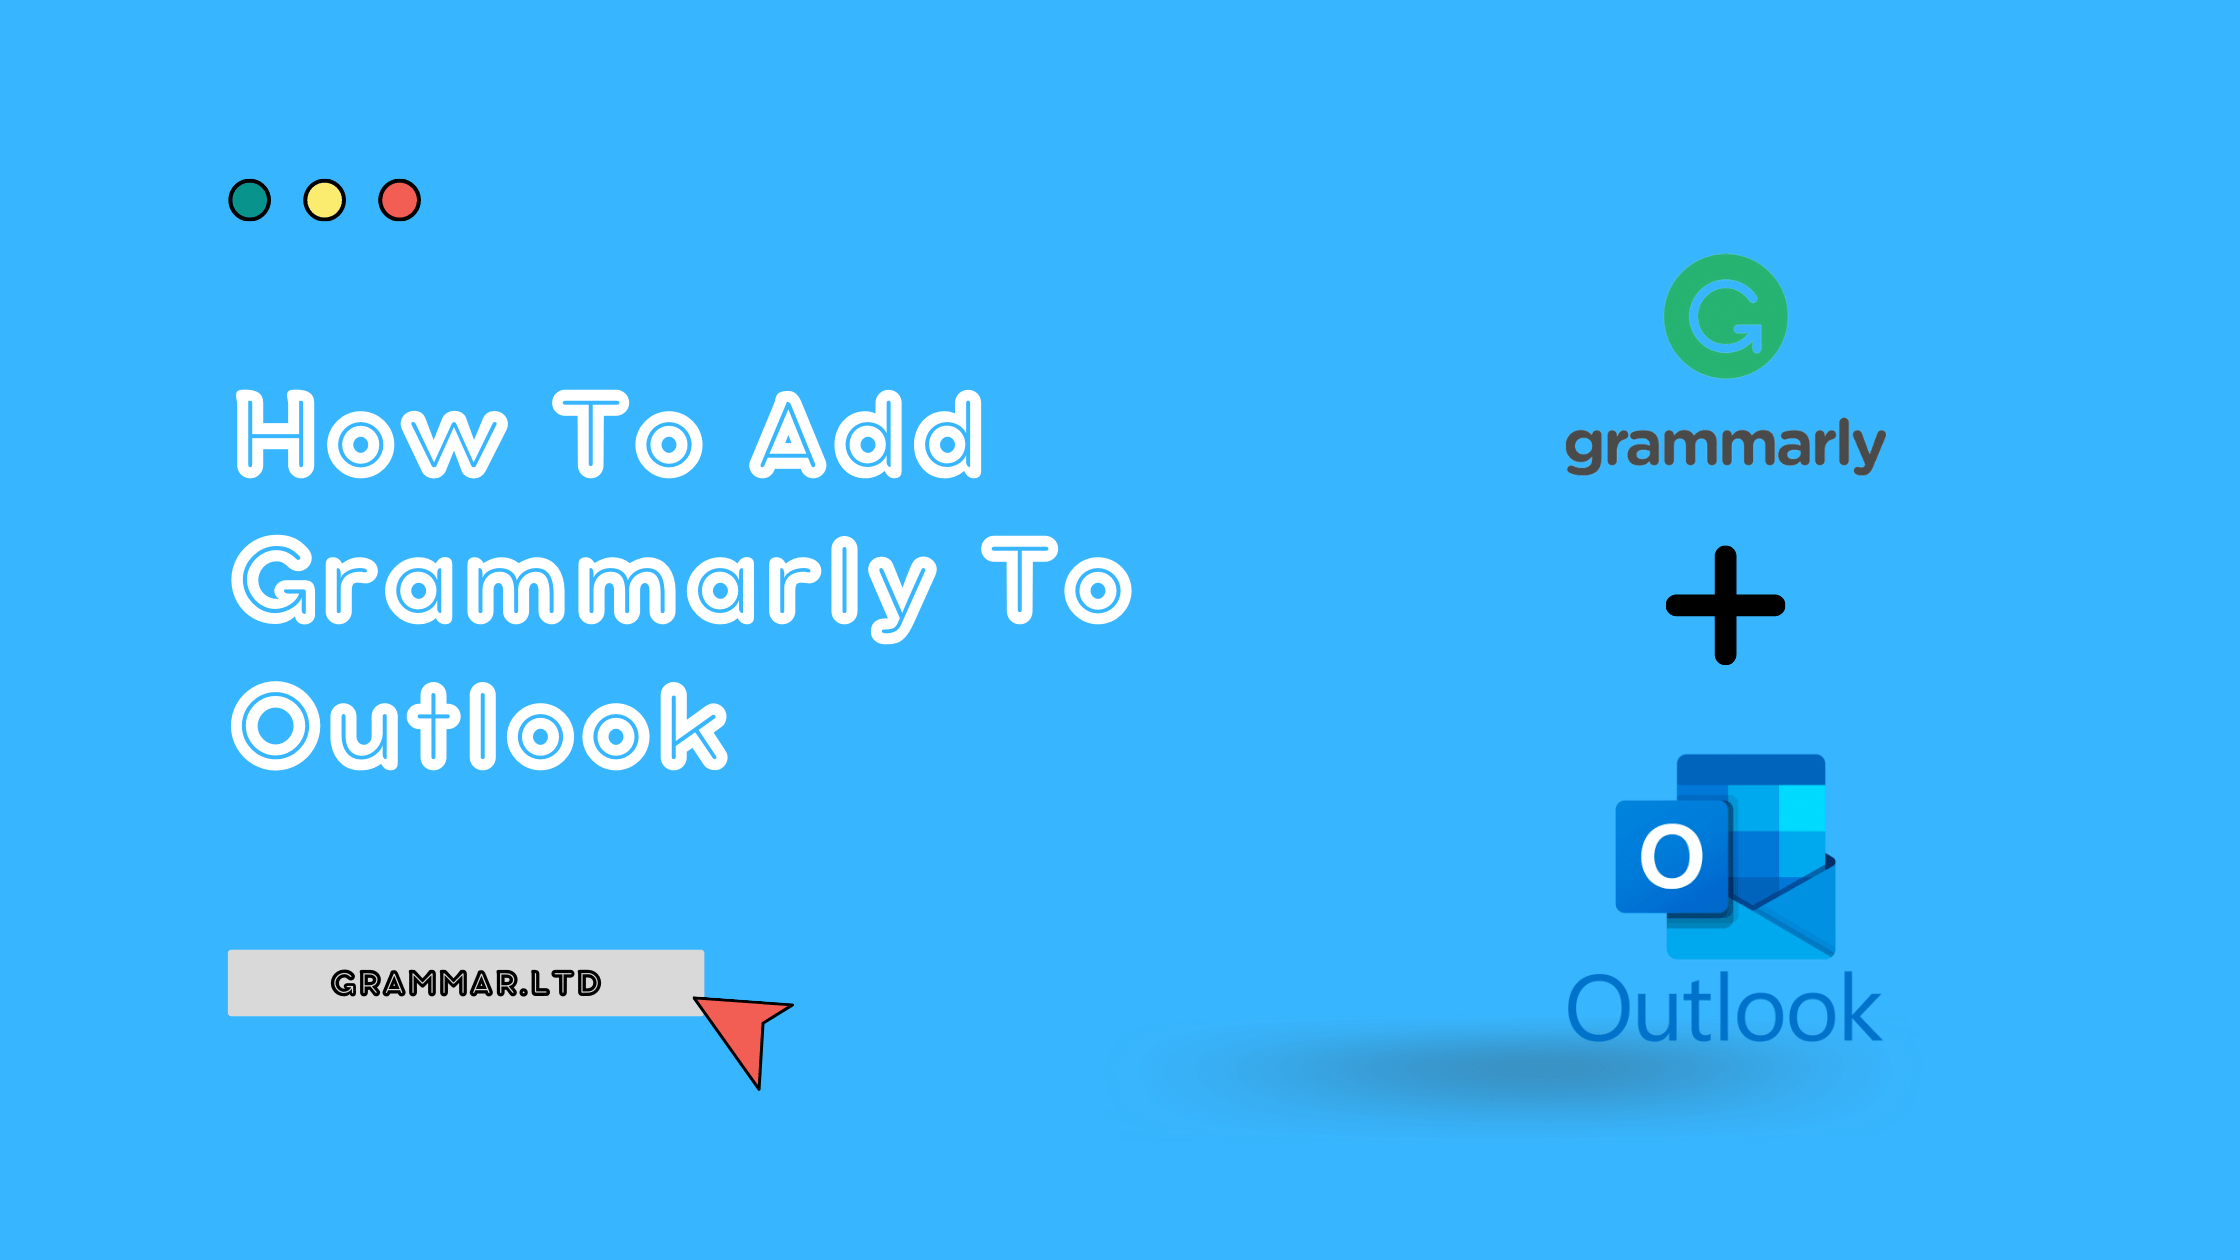 grammarly for outlook email free download